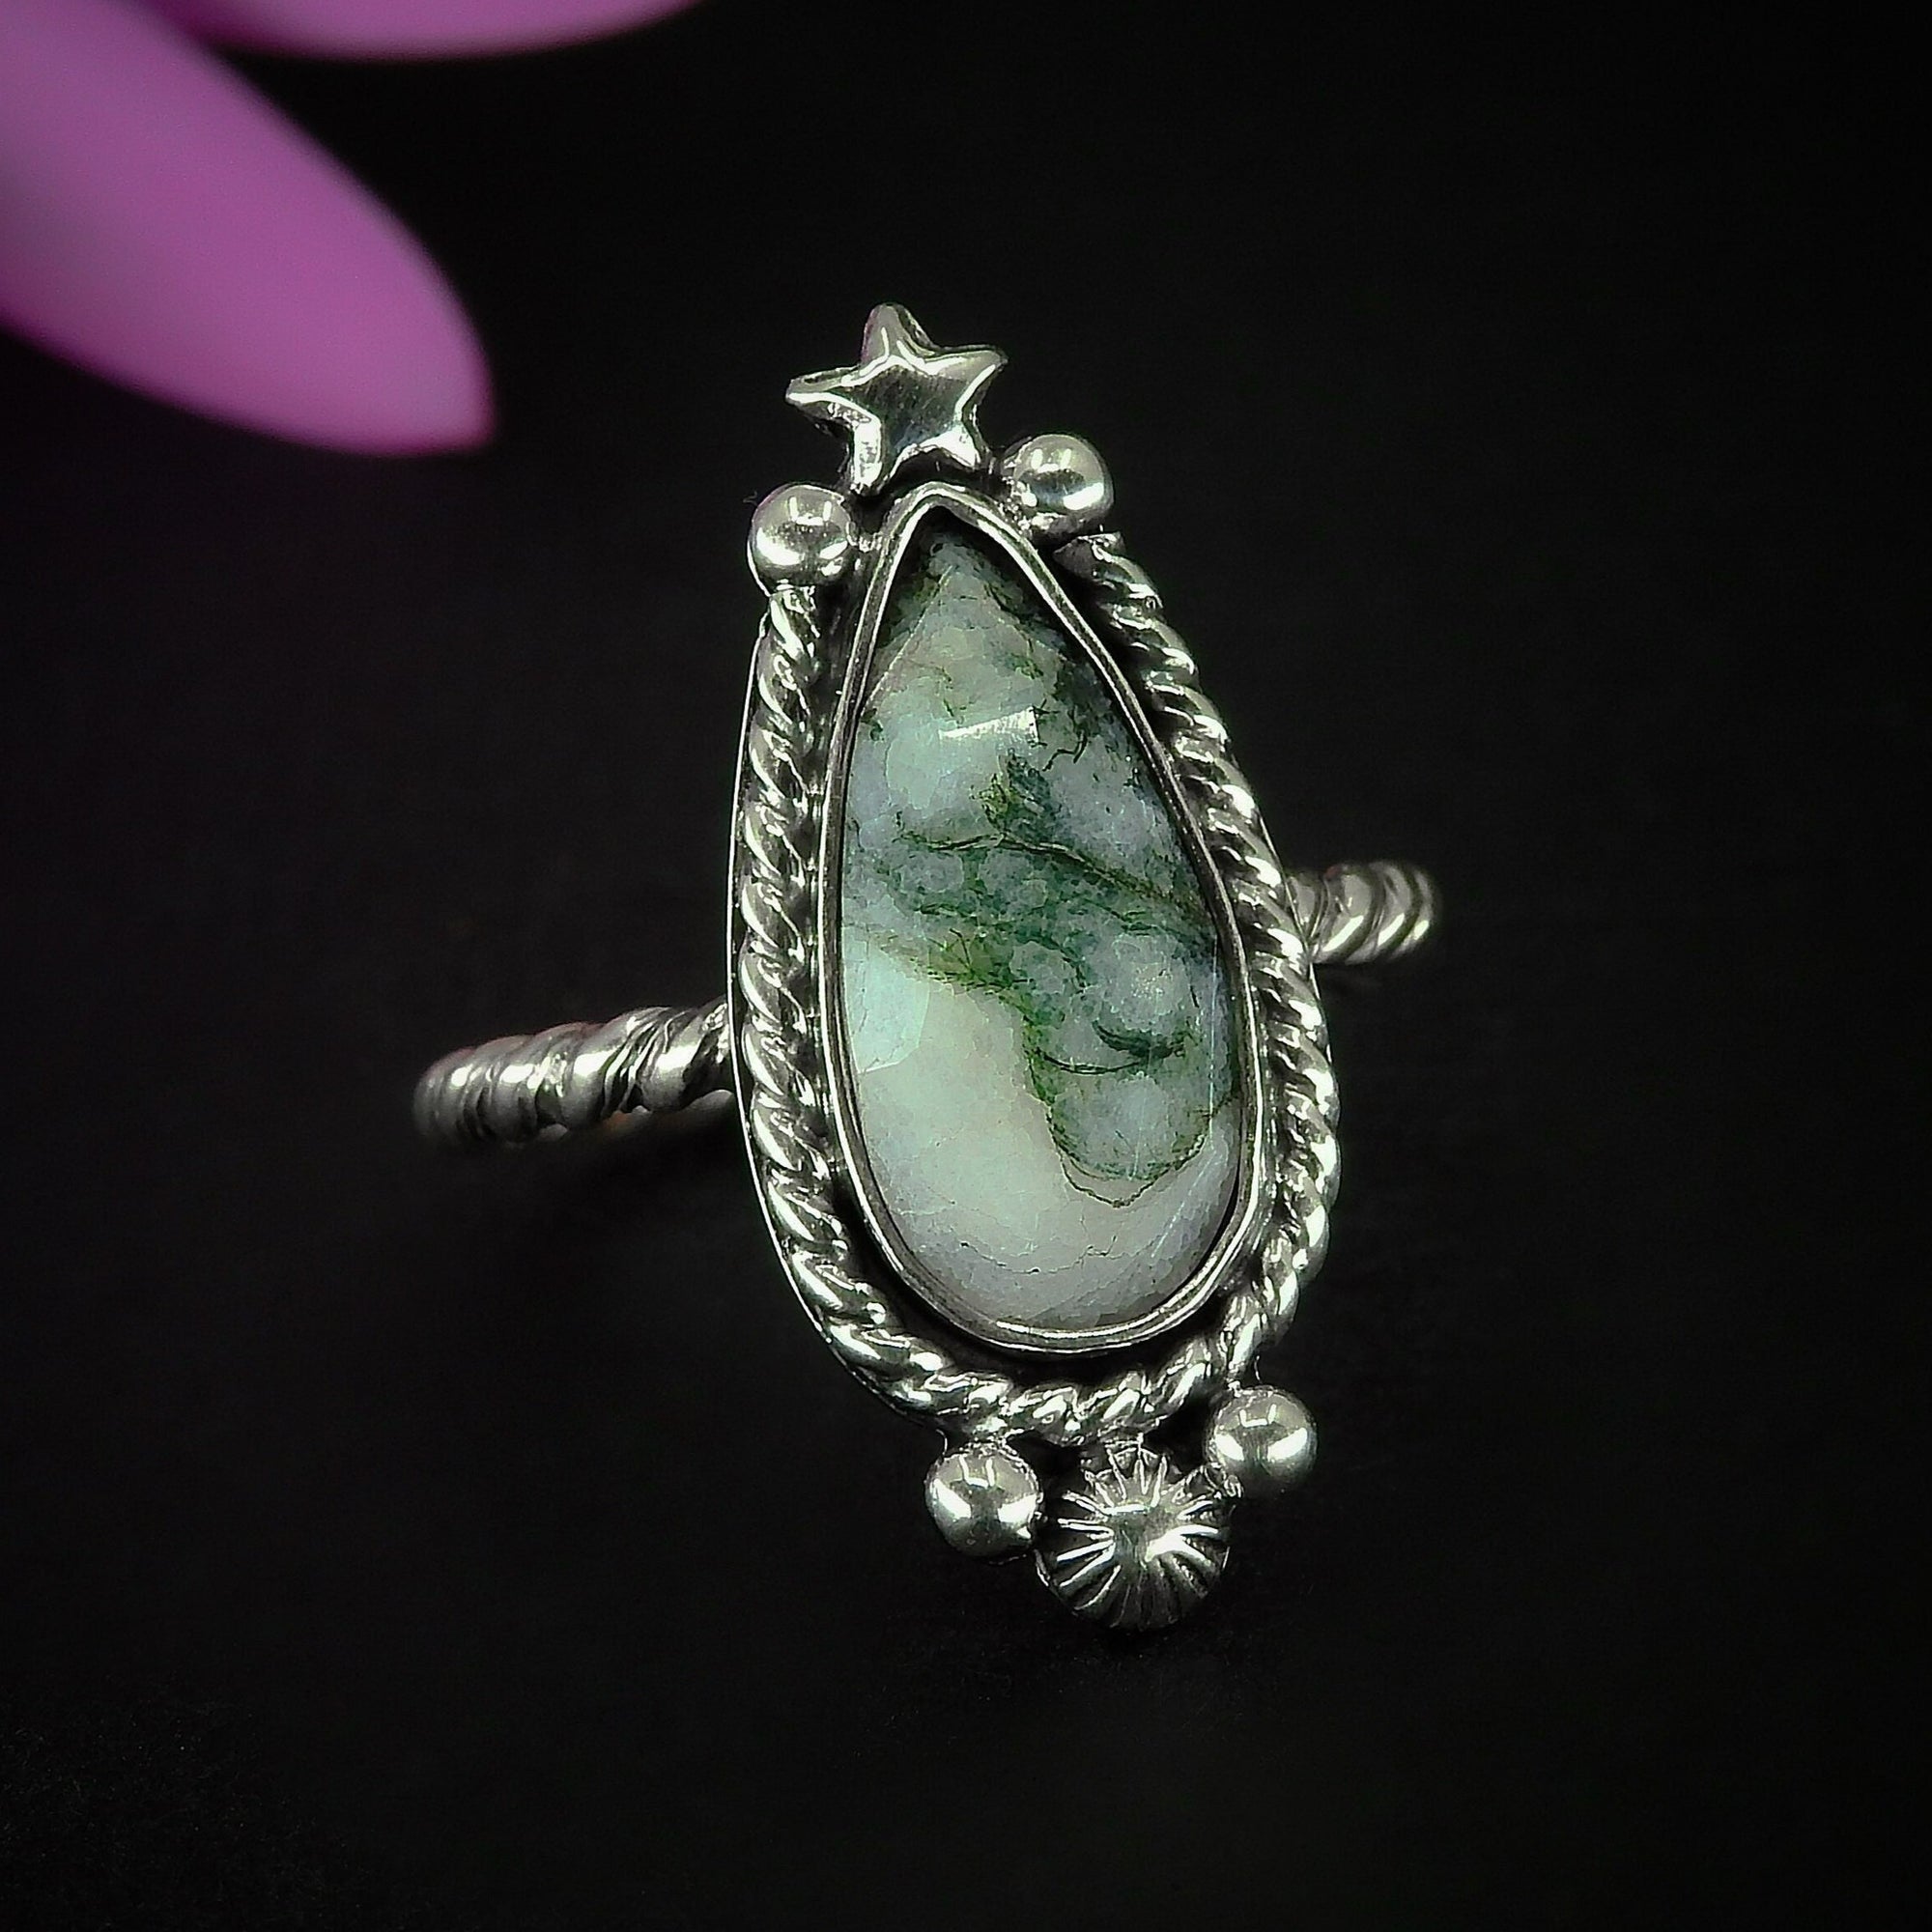 Rose Cut Moss Agate Ring - Size 5 to 5 1/4 Sterling Silver - Dainty Moss Agate Jewelry - Faceted Stone Ring, Leaf Ring, Teardrop Tree Agate